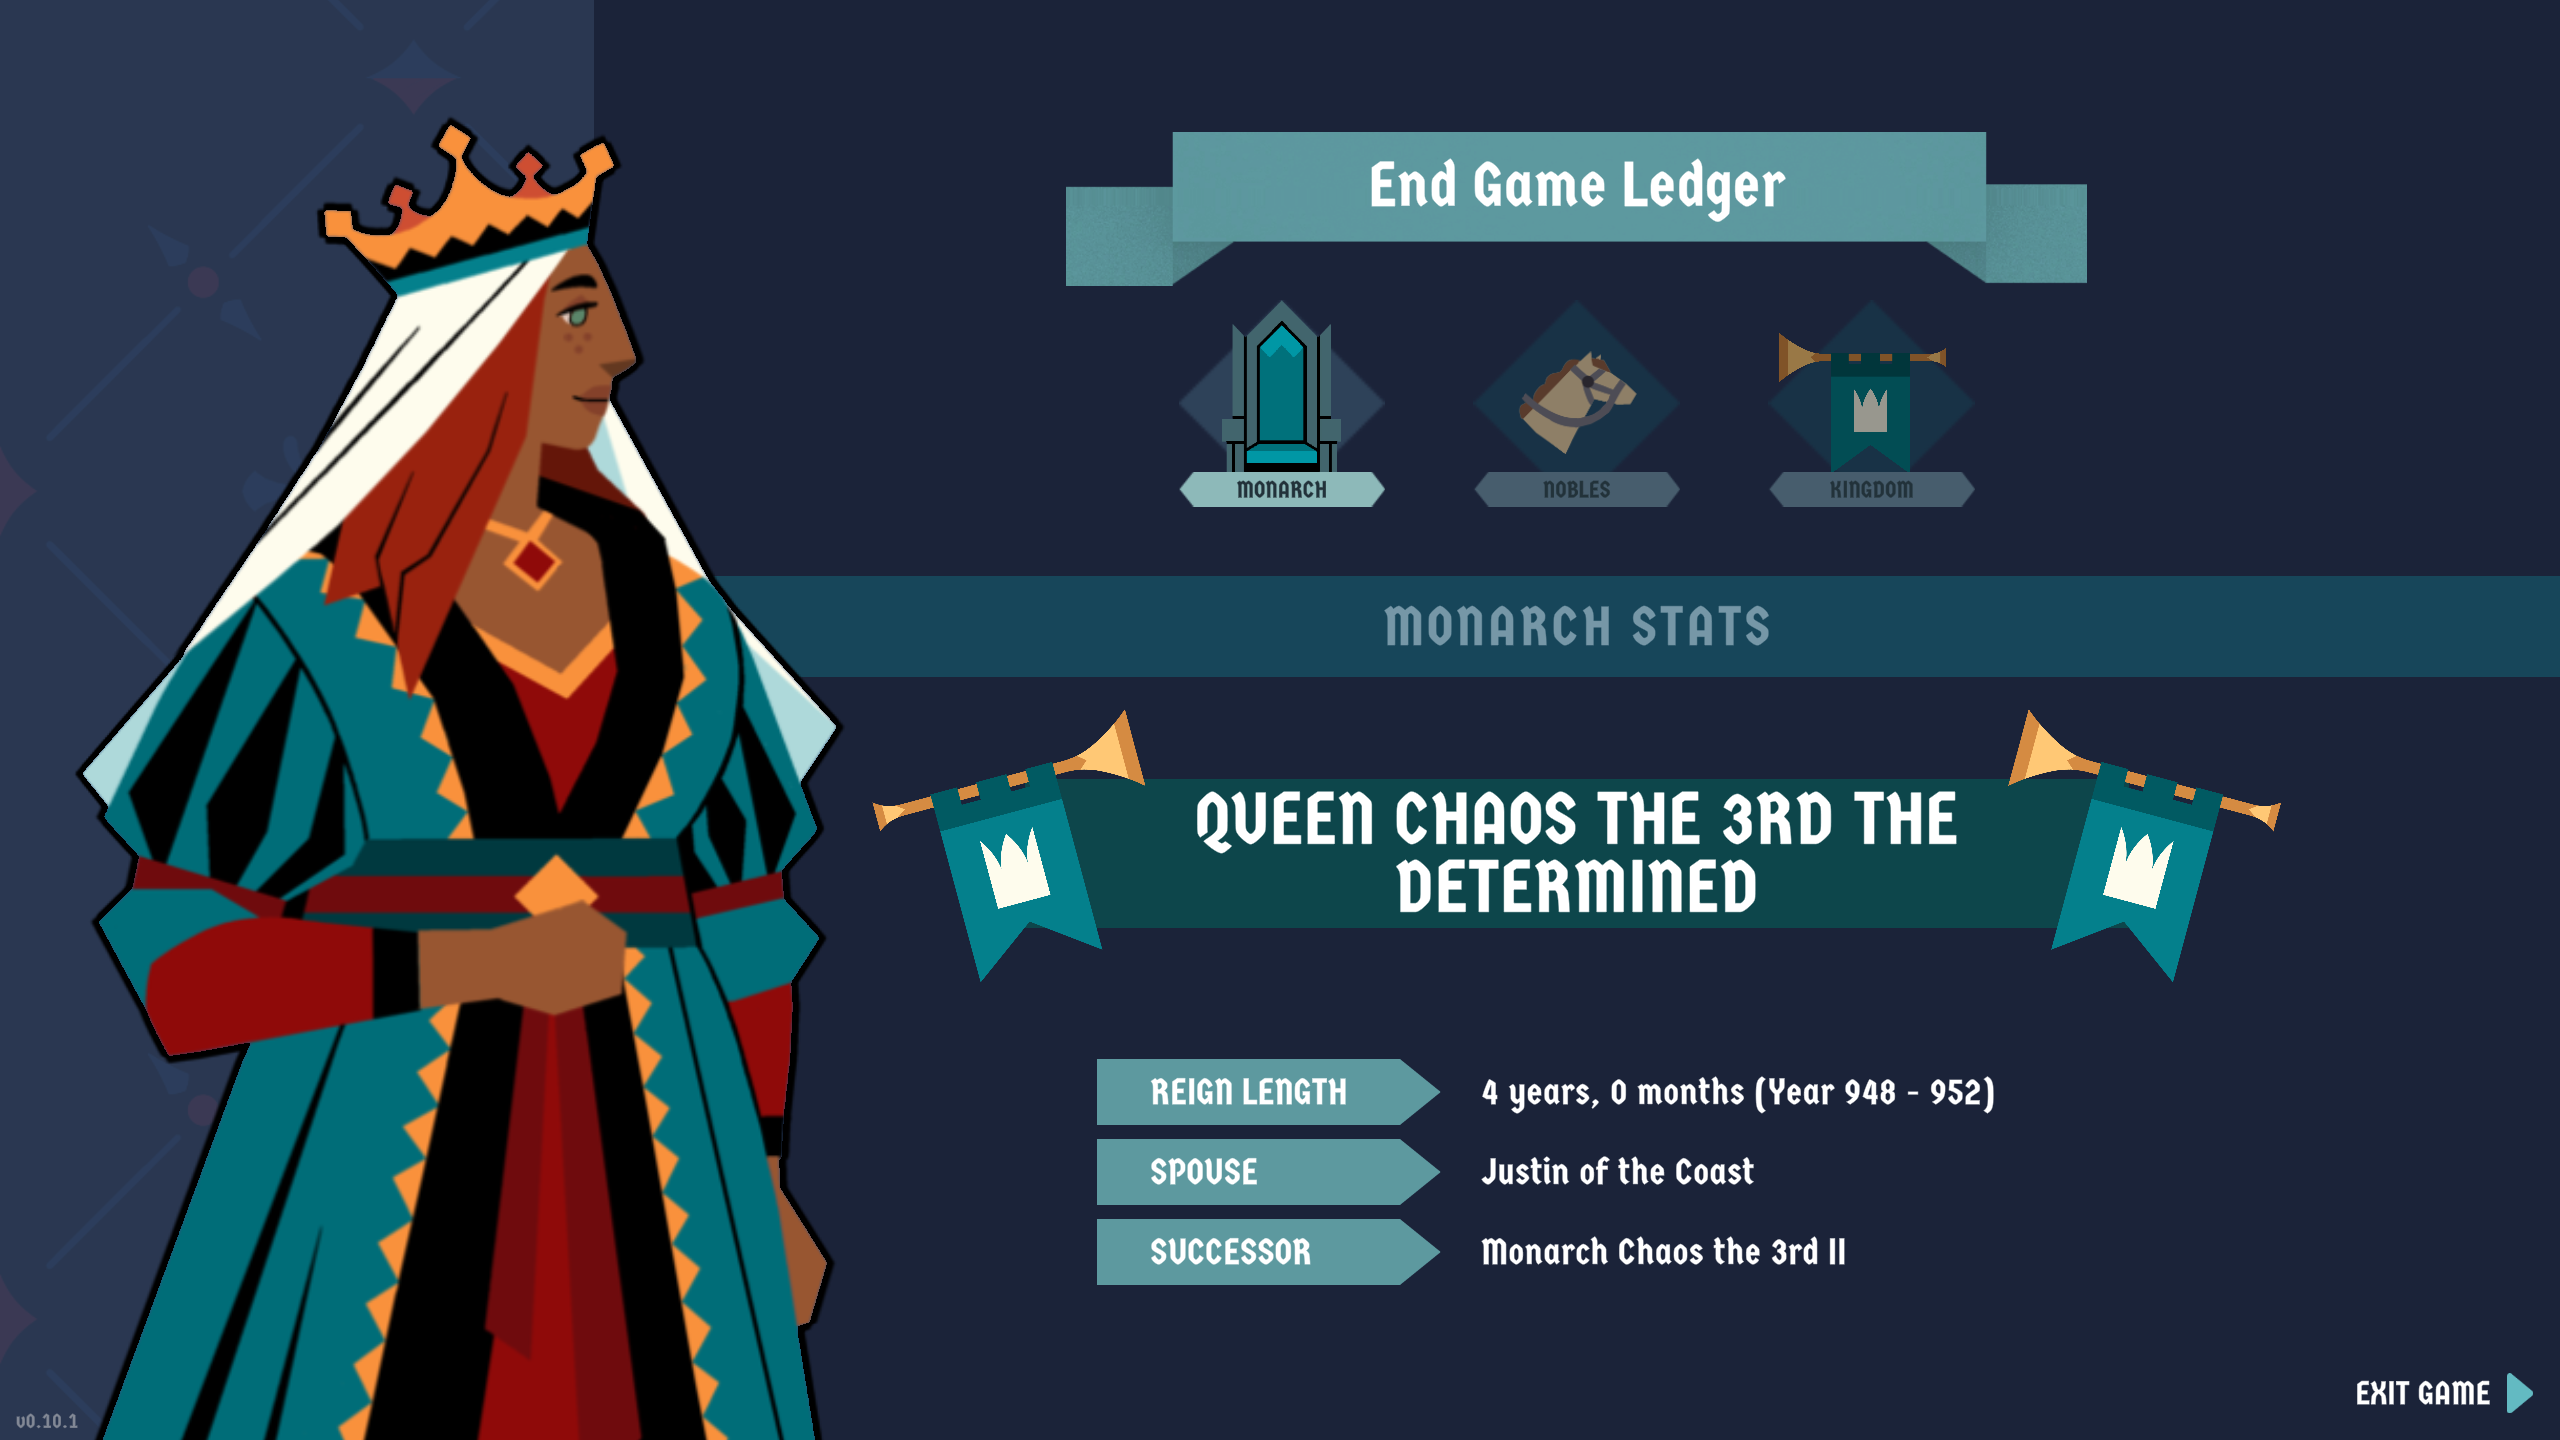 This is the end game ledger, giving you the option to check your monarch stats, nobles and kingdom stats. below the monarch stats give the known name, Queen Chaos the 3rd the determined, then reign length of 4 years, followed by spouse of justin of the coast and your successor, Monarch Chaos the 3rd II